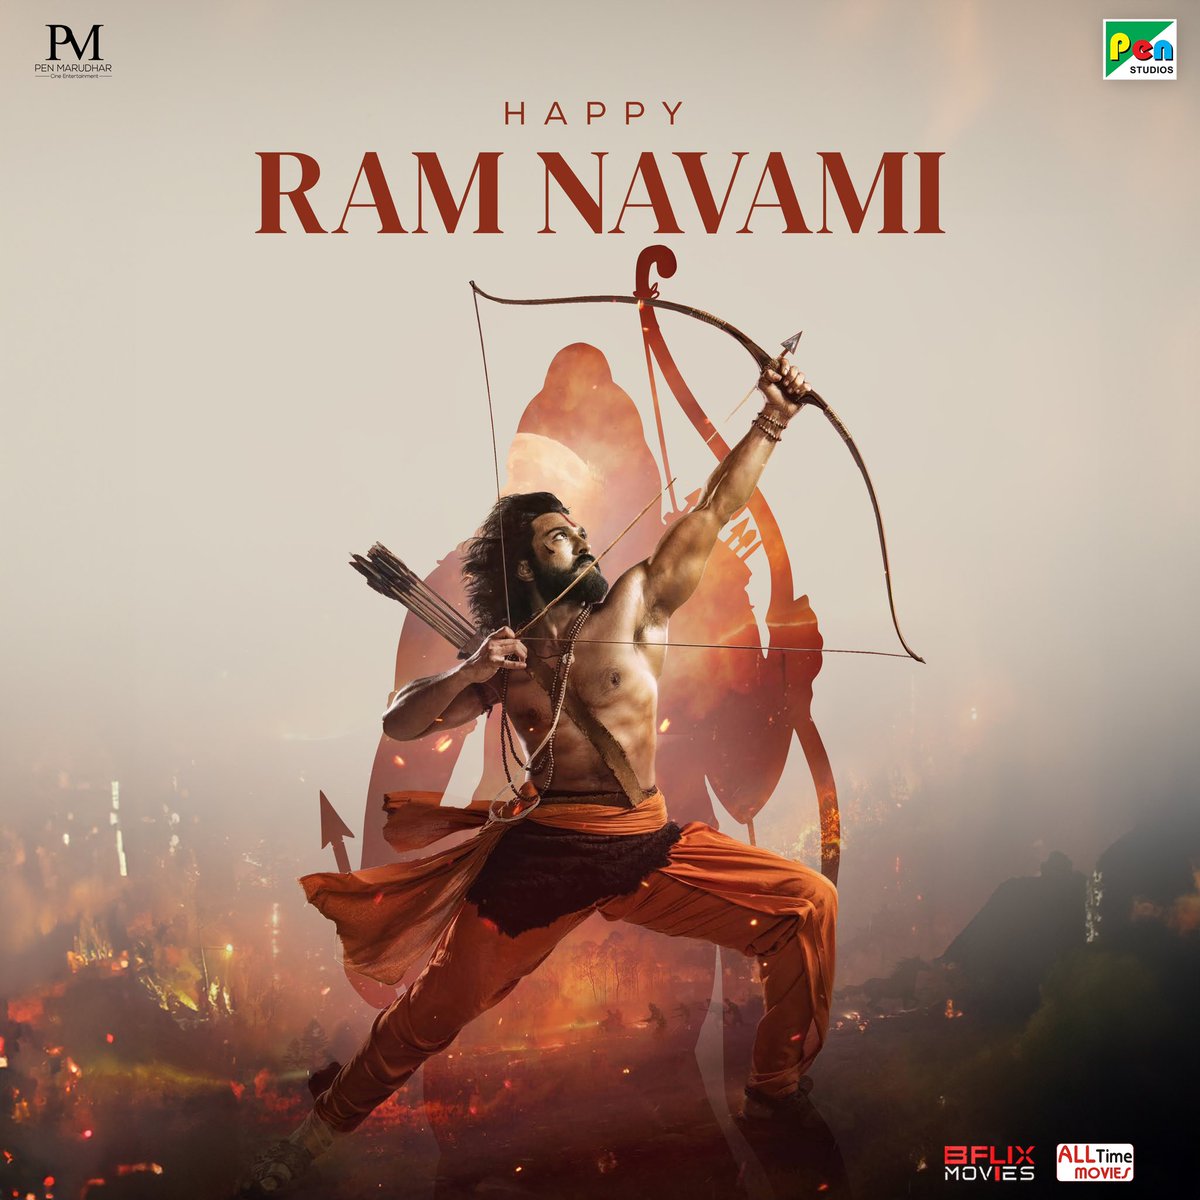 Lord Ram is the most righteous hero to have ever existed 💯 May this auspicious occasion propel us to battle every villain! Happy Ram Navami! #HappyandRighteousEnding